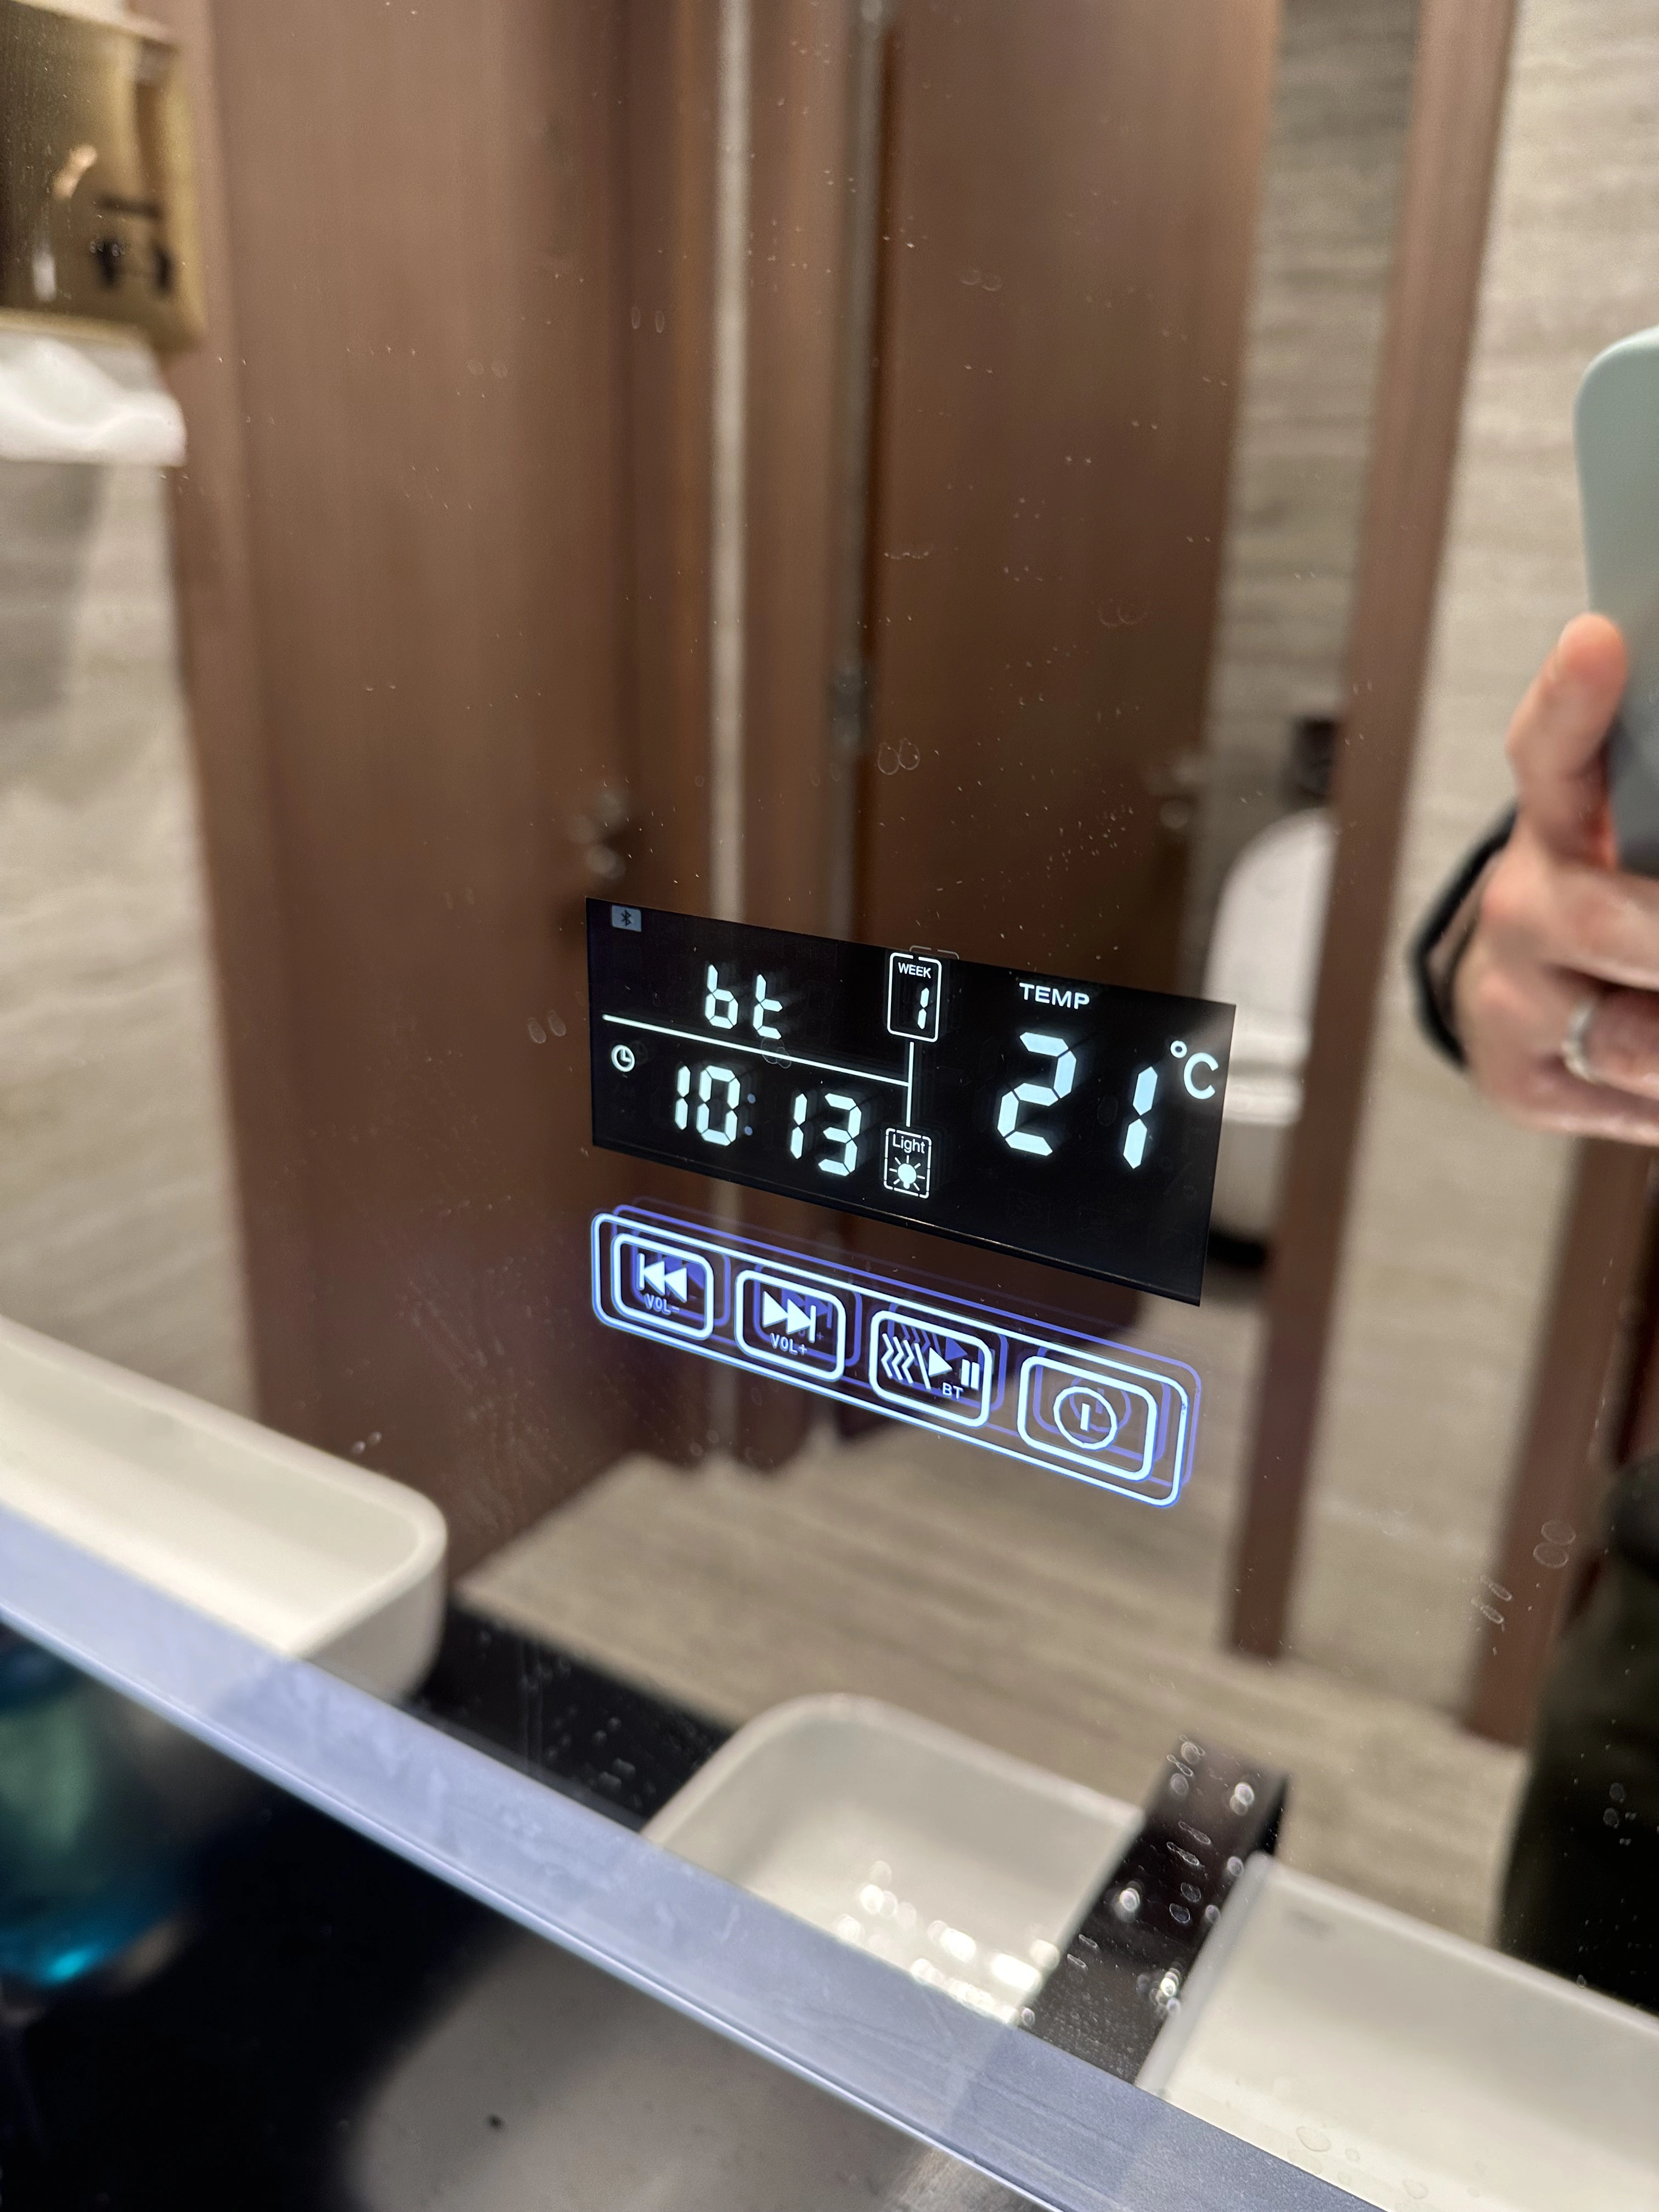 Photograph of the electronic mirror in the bathrooms at the Hayyak lounge